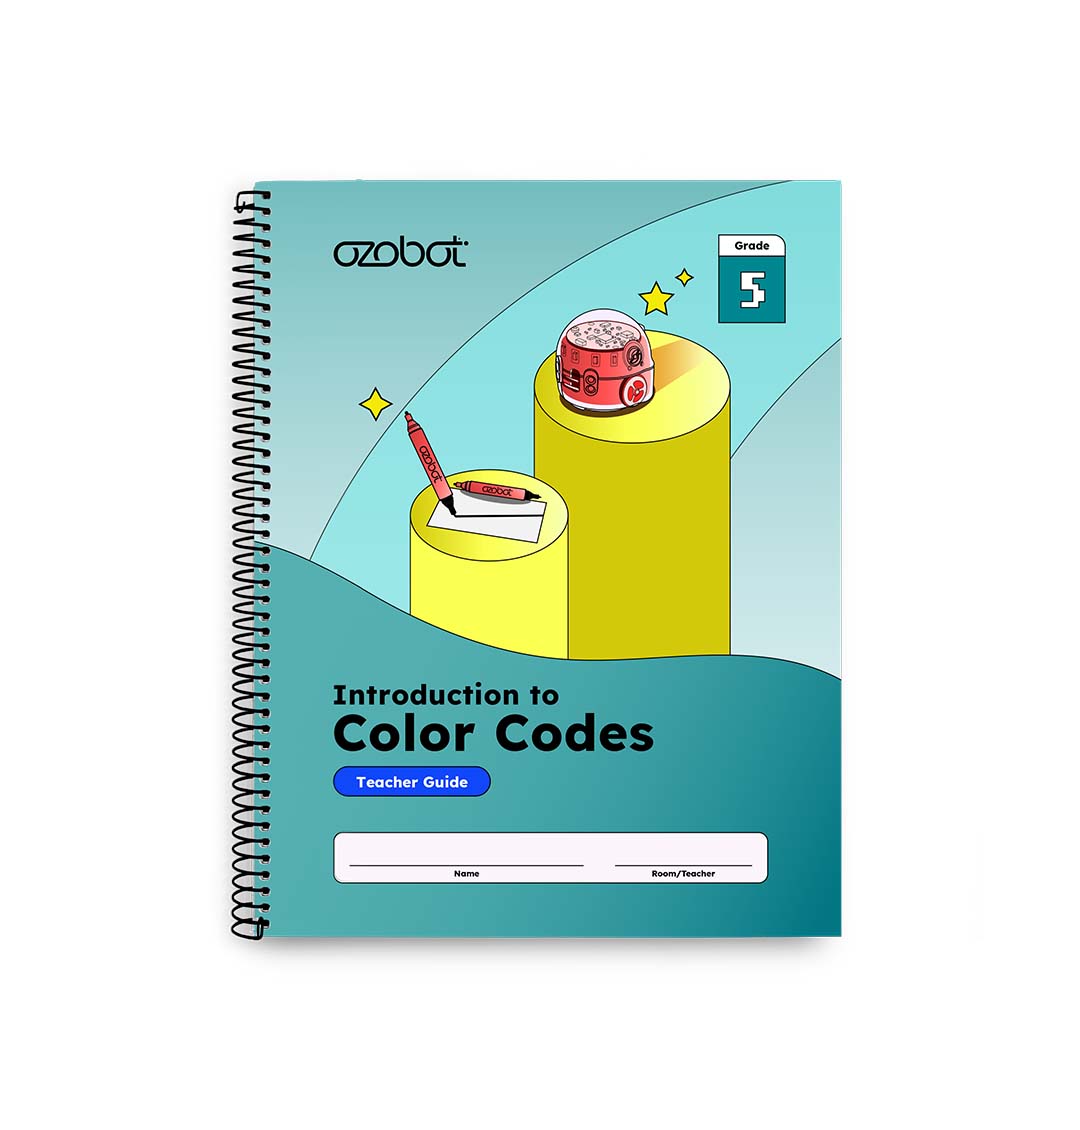 Introduction to Color Codes Curriculum answer key by Ozobot - collaborative classroom tools teacher guide for students K-5